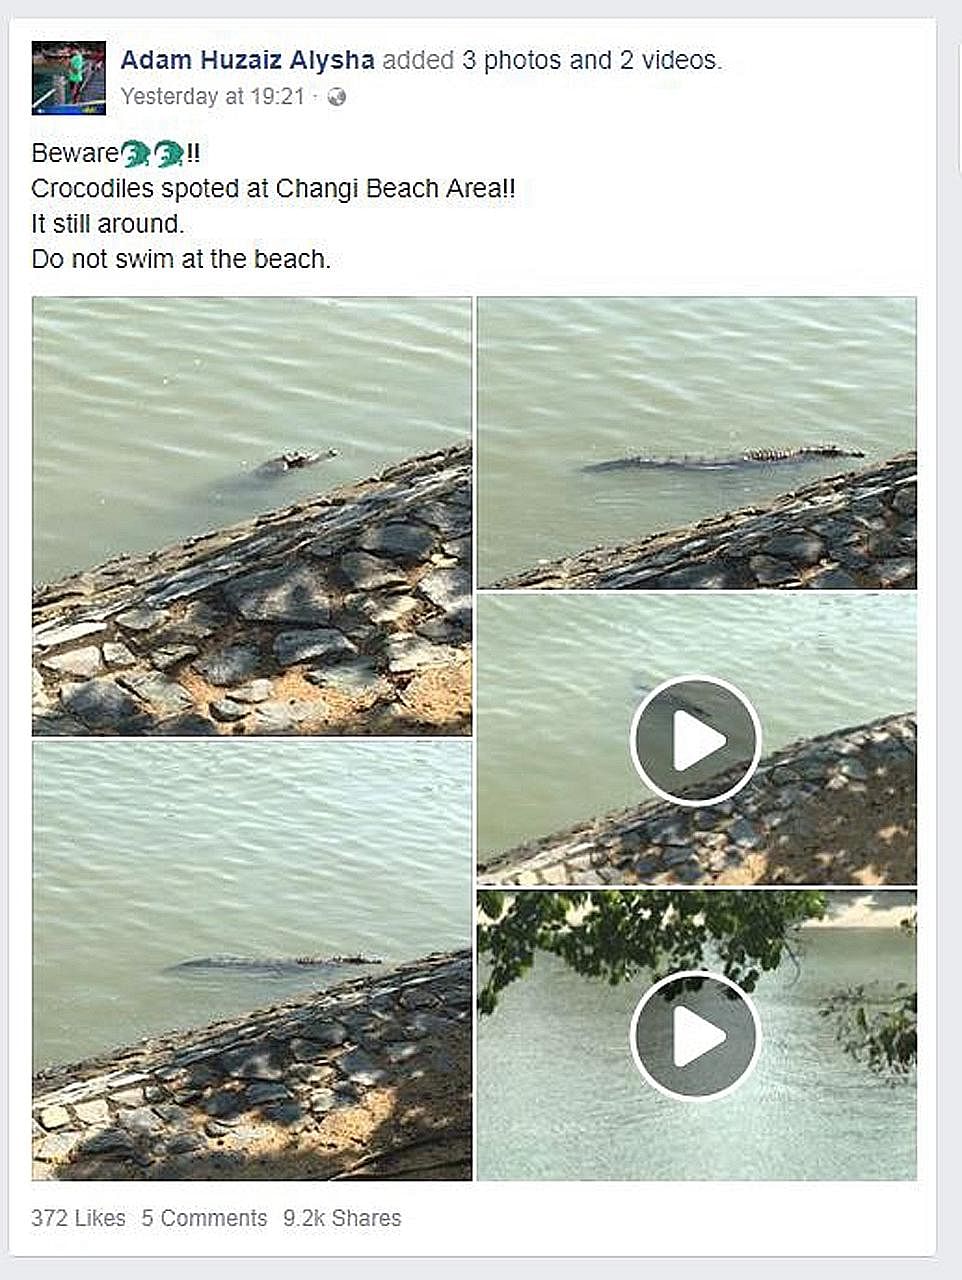 Mr Yusaini Abdul Rahim, an ICA officer who works at Changi Ferry Point Terminal, spotted the crocodile twice while he was on patrol. He posted some photos and videos of the reptile on Facebook to warn others to be careful while in the area.